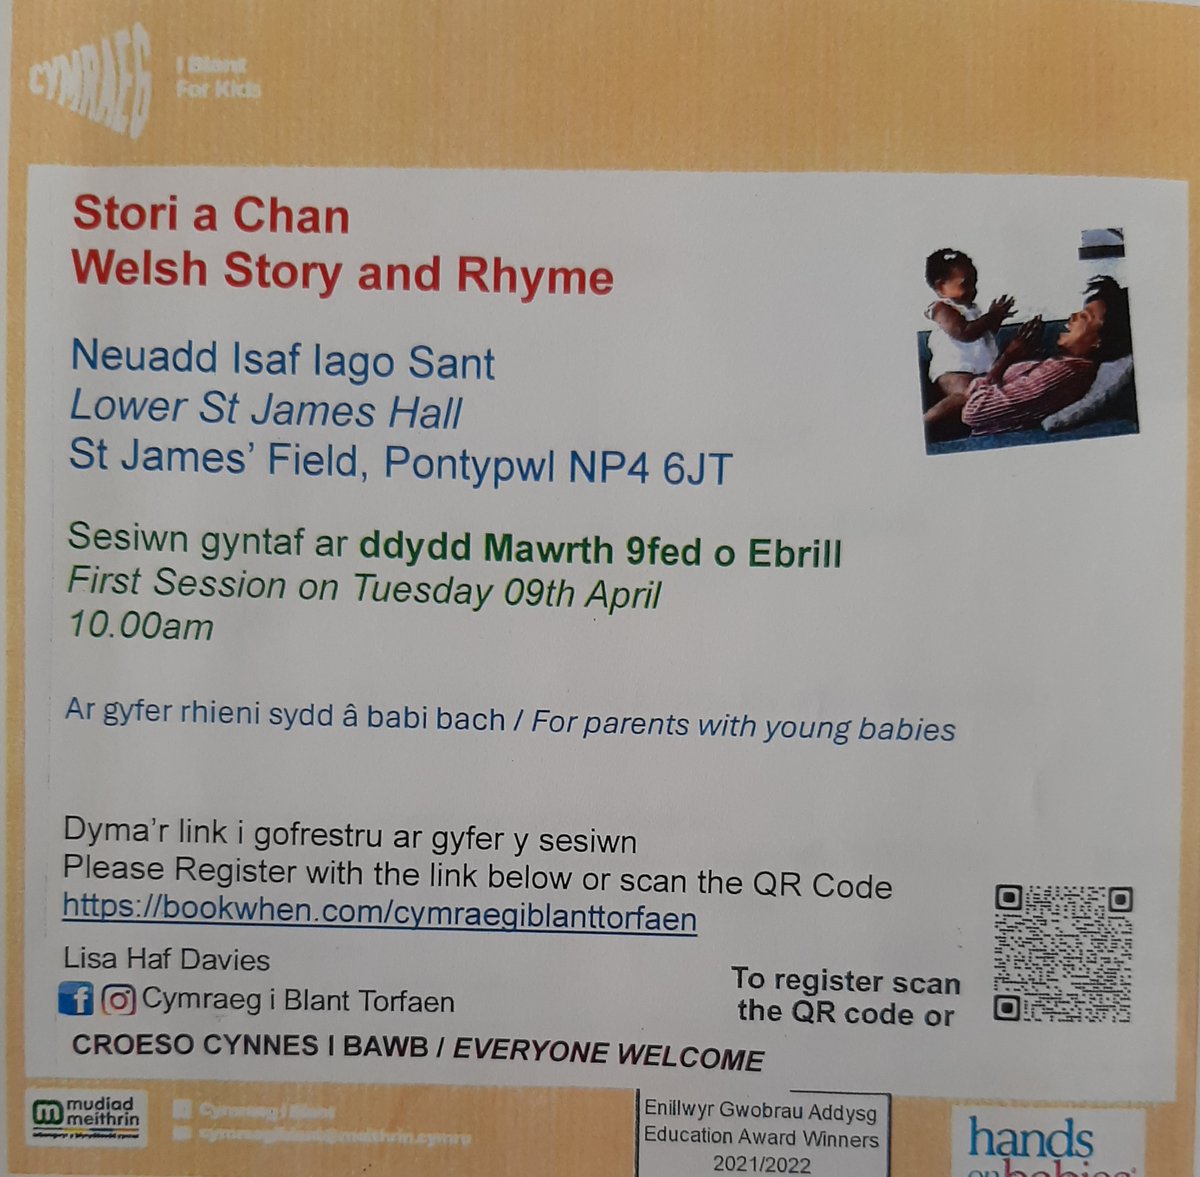 We are looking forward to welcoming Lisa from @Cymraegforkids every Tuesday morning for a Stori a Chan session for parents and young babies. All free and it would be lovely to see alot of people there. The first session is on Tuesday 09 April and you need to register before hand